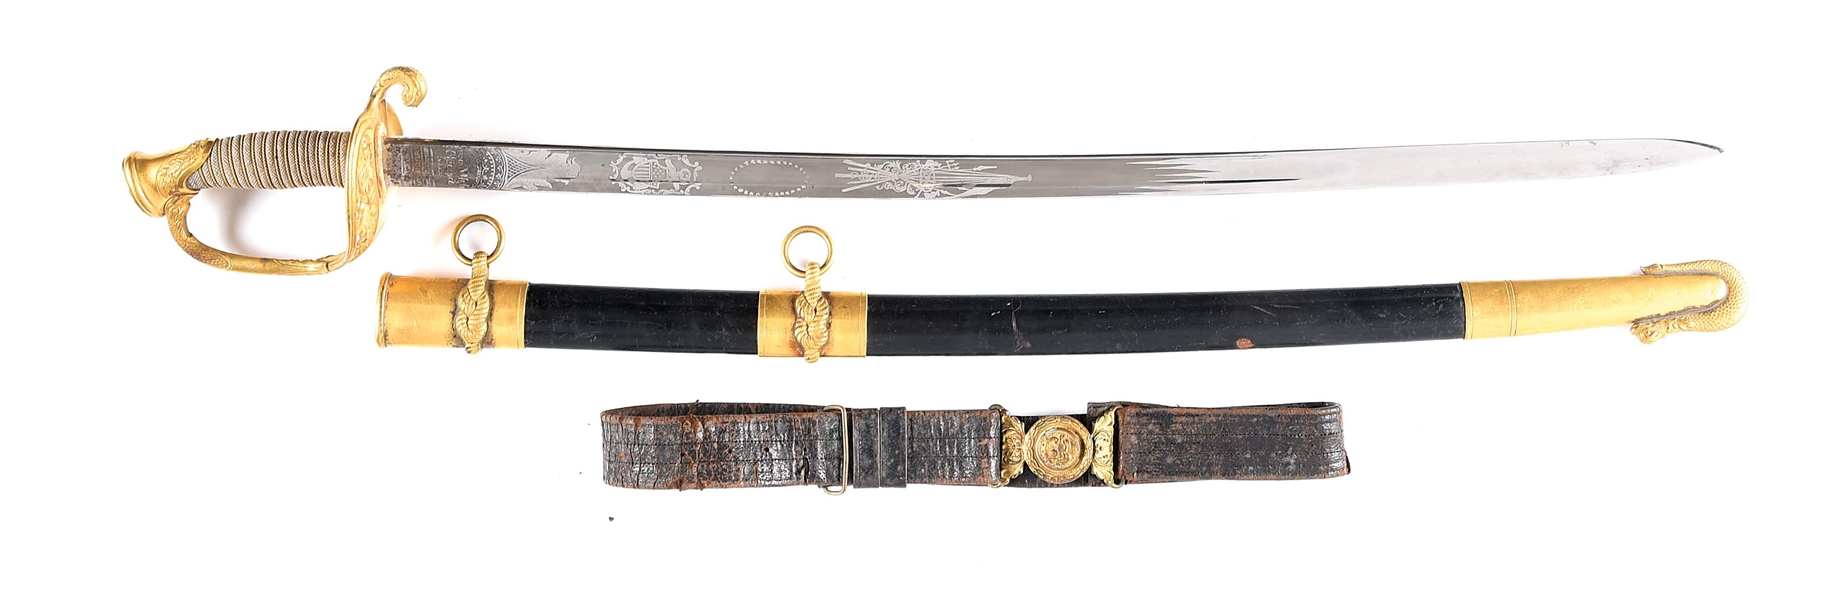 US CIVIL WAR AMES M1852 NAVAL OFFICERS SWORD WITH LEATHER NAVAL OFFICERS BELT AND BUCKLE OF COMMODORE STEPHEN DECATUR (1814-1876)